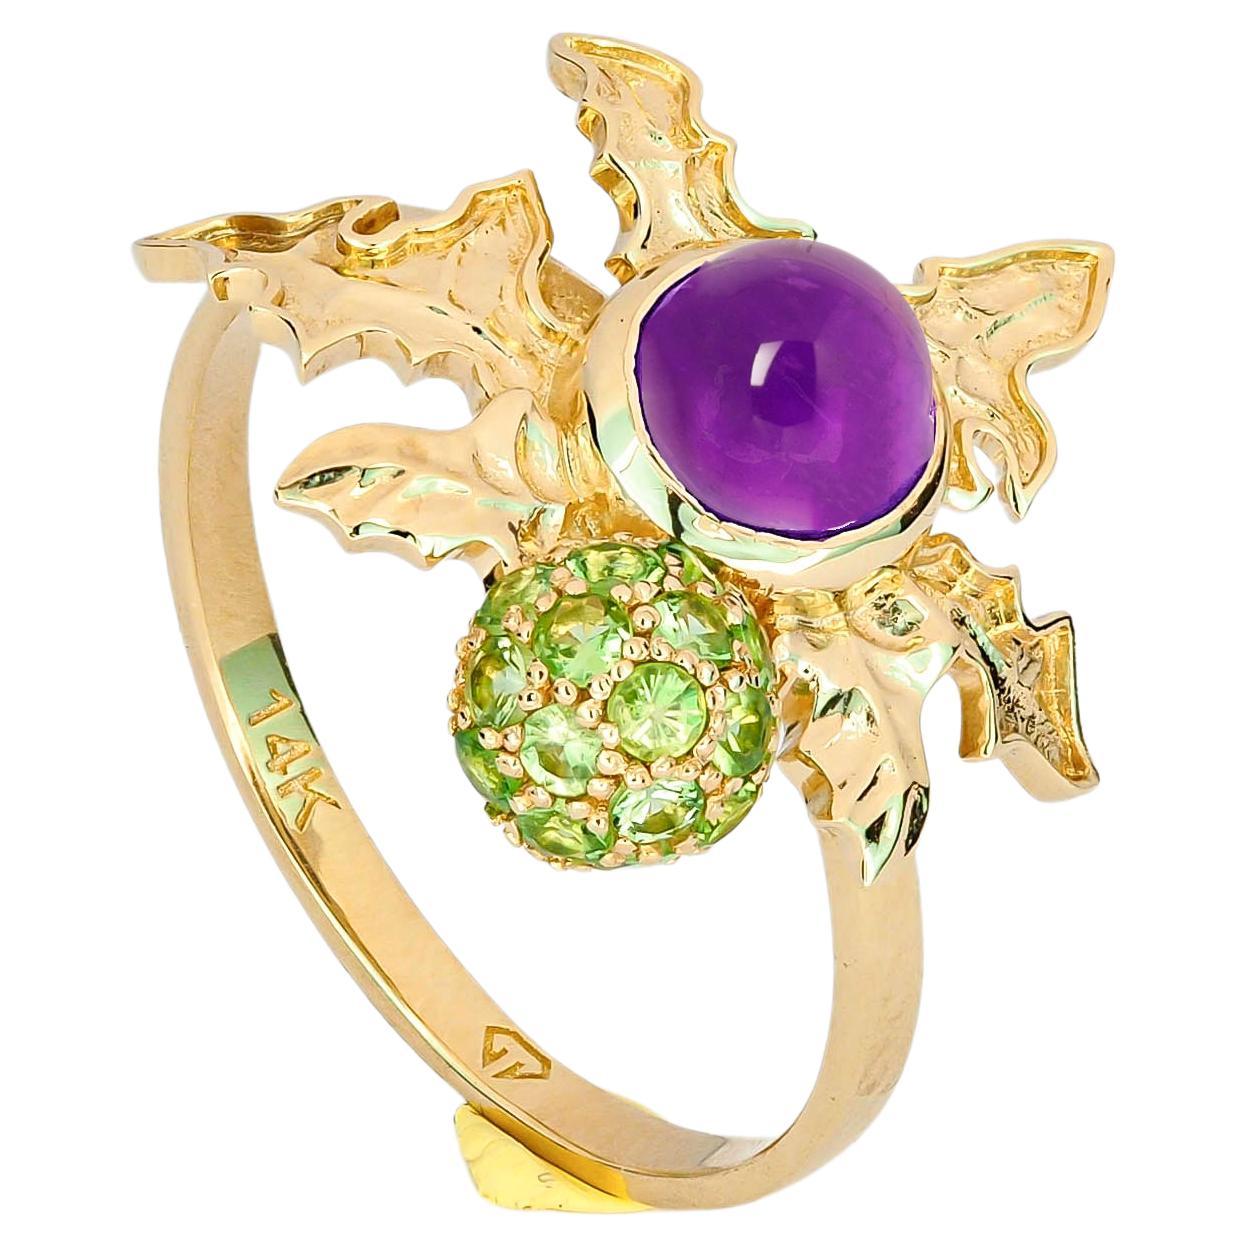 For Sale:  14 K Gold Scottish Thistle Ring with Amethyst and Peridots!